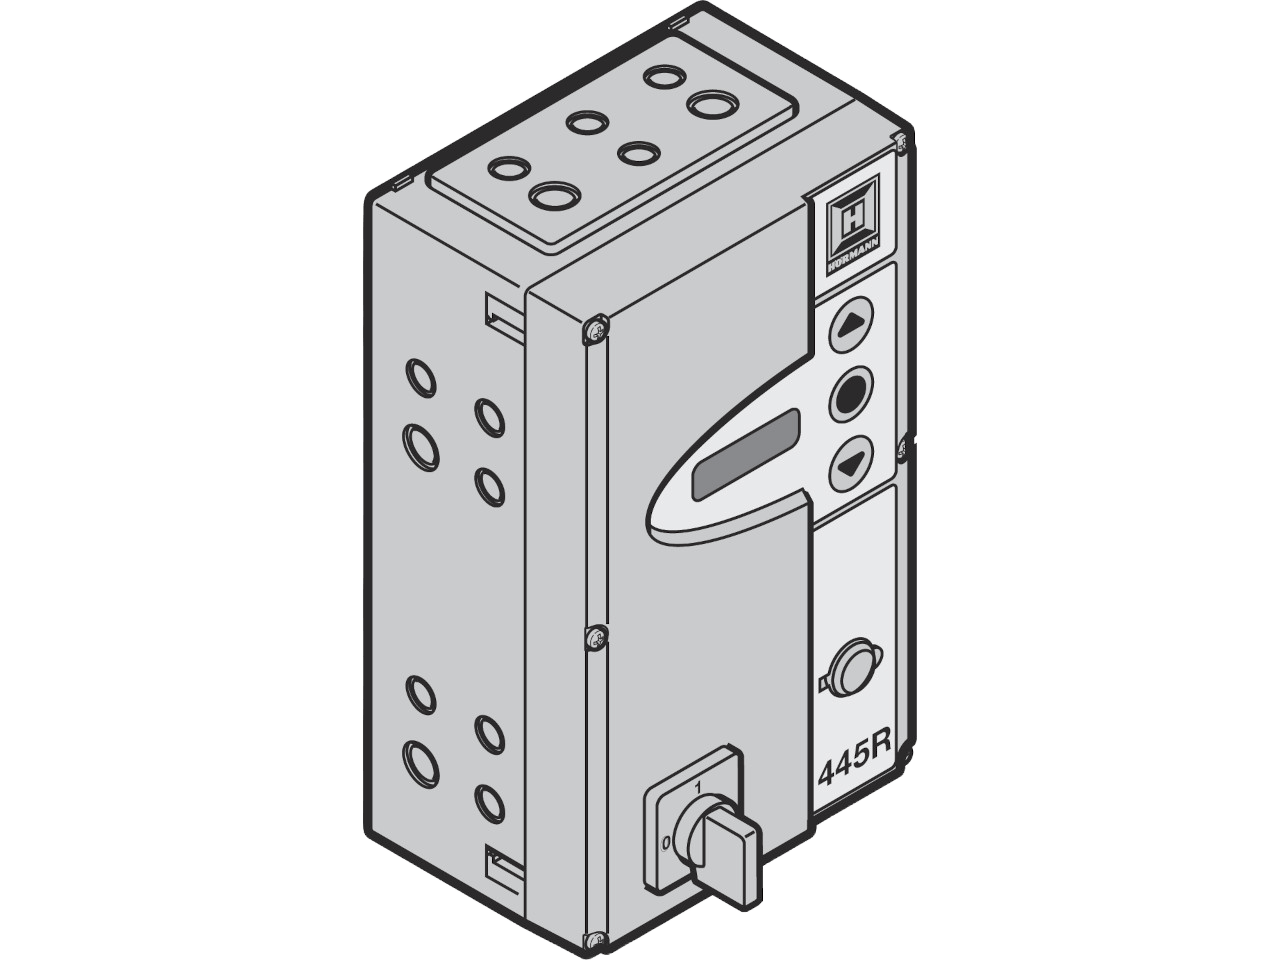 Hormann Door Control 360 in Industrial Enclosure with main switch